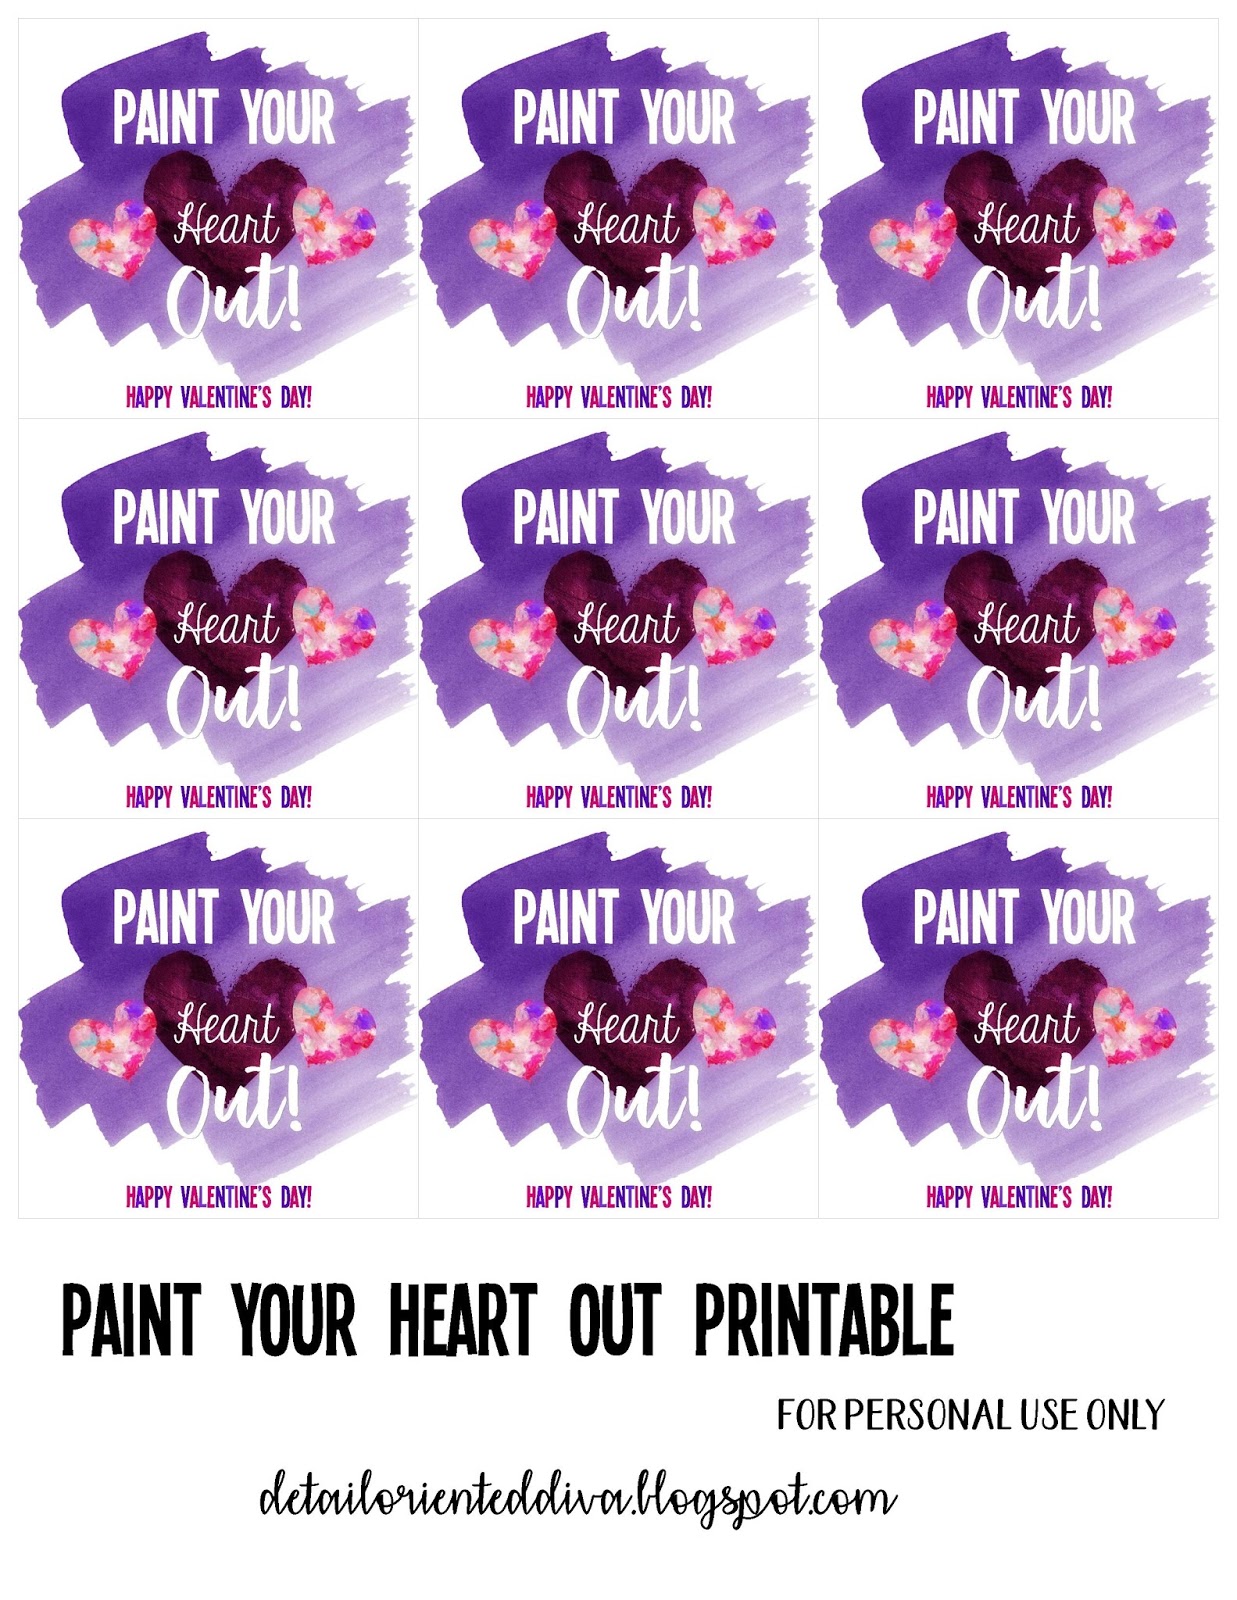 paint-your-heart-out-free-printable-valentine